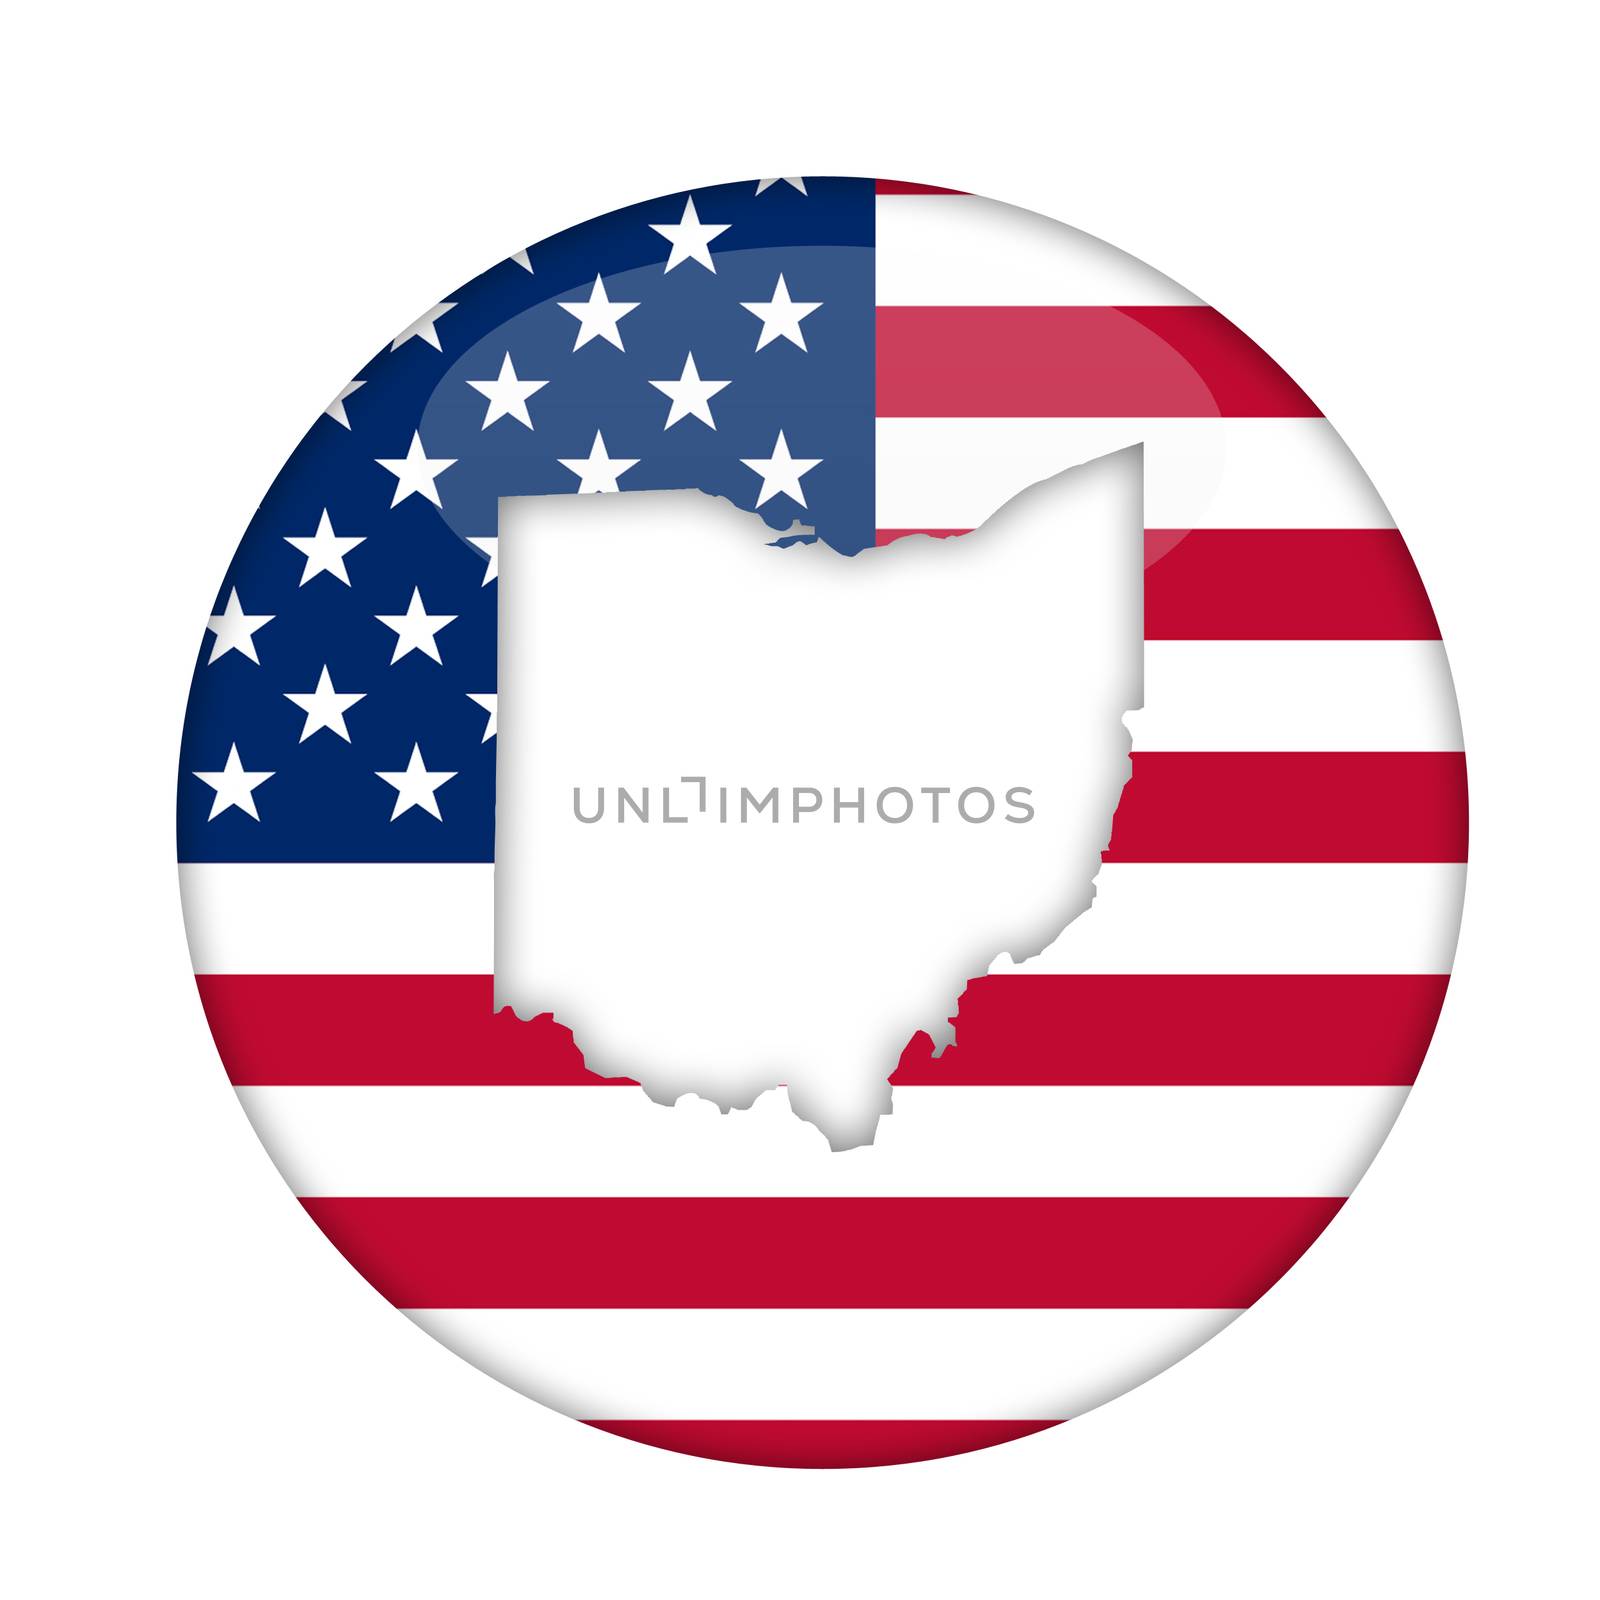 Ohio state of America badge by speedfighter